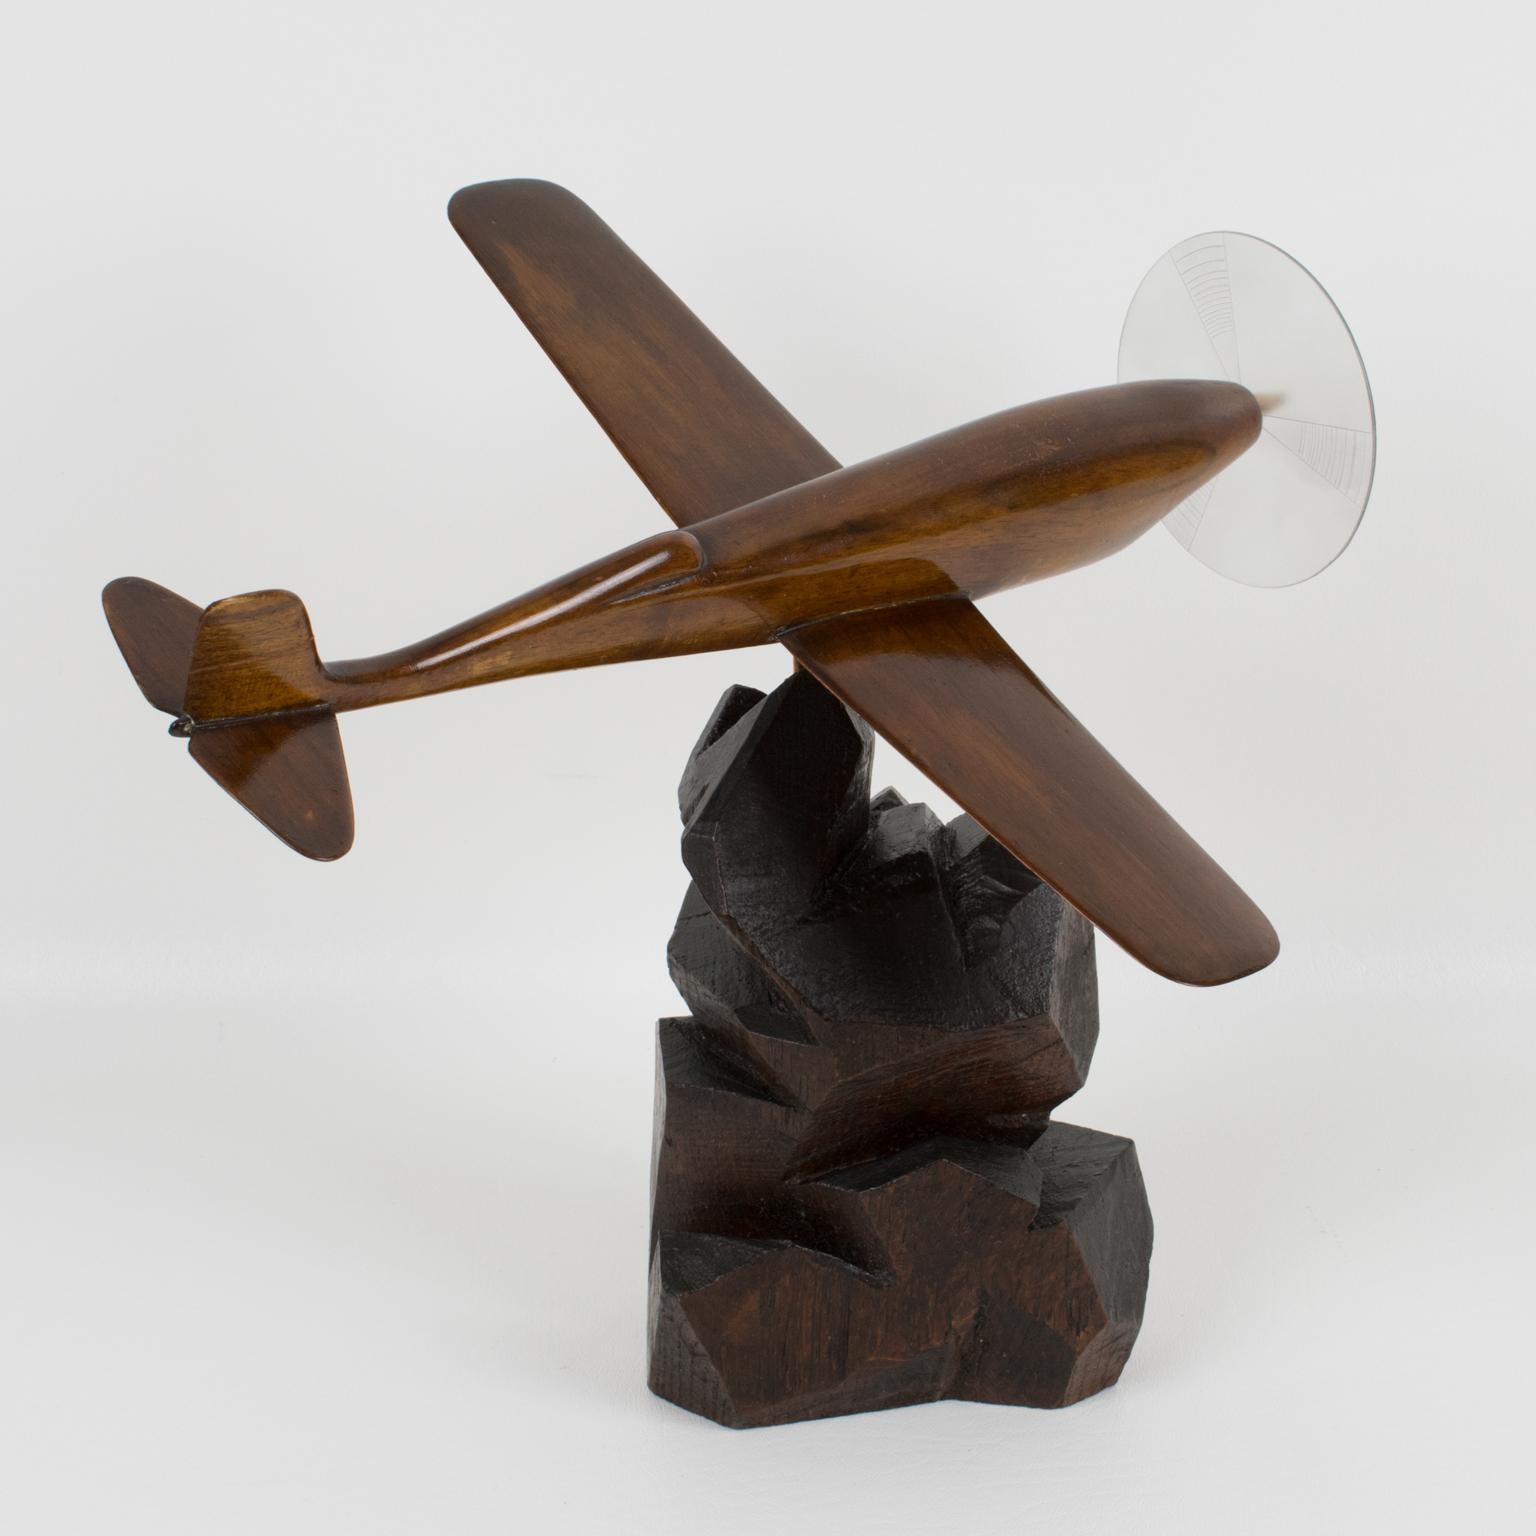 Stylish Art Deco wooden airplane model mounted on a stylized wooden plinth. This Art Deco model airplane is made with solid varnish wood. It has one large Lucite propeller (note original propeller was probably metal or wood and replaced at some